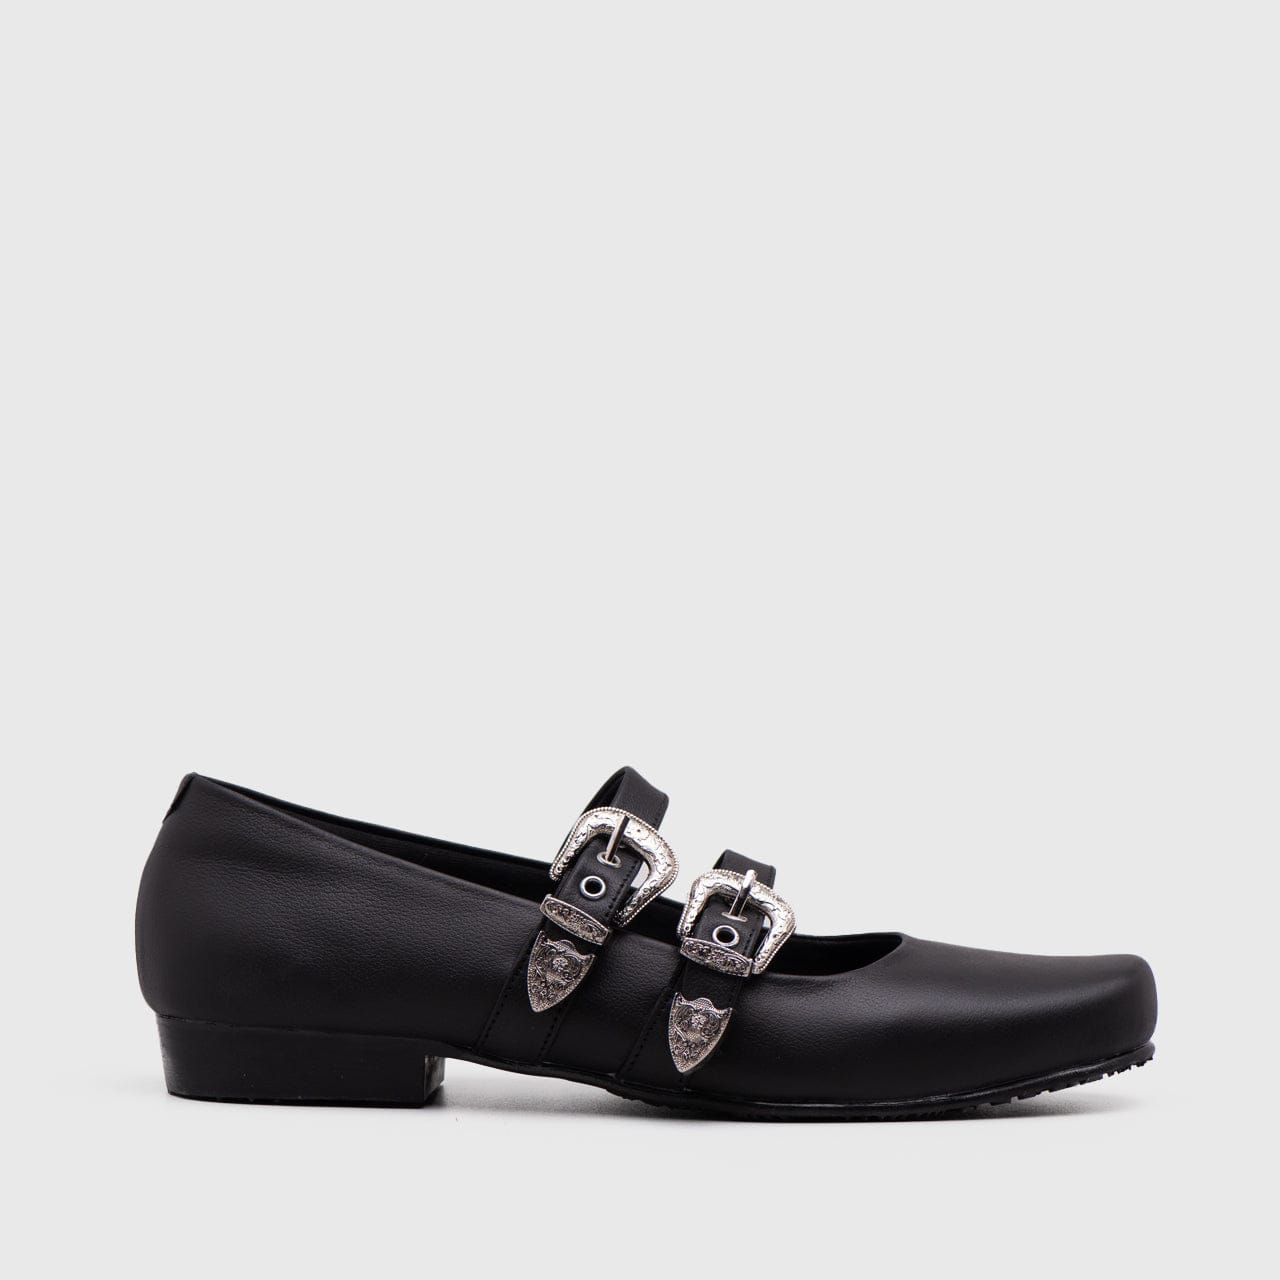 Adorable Projects Official Flat shoes Baleva Flat Shoes Black